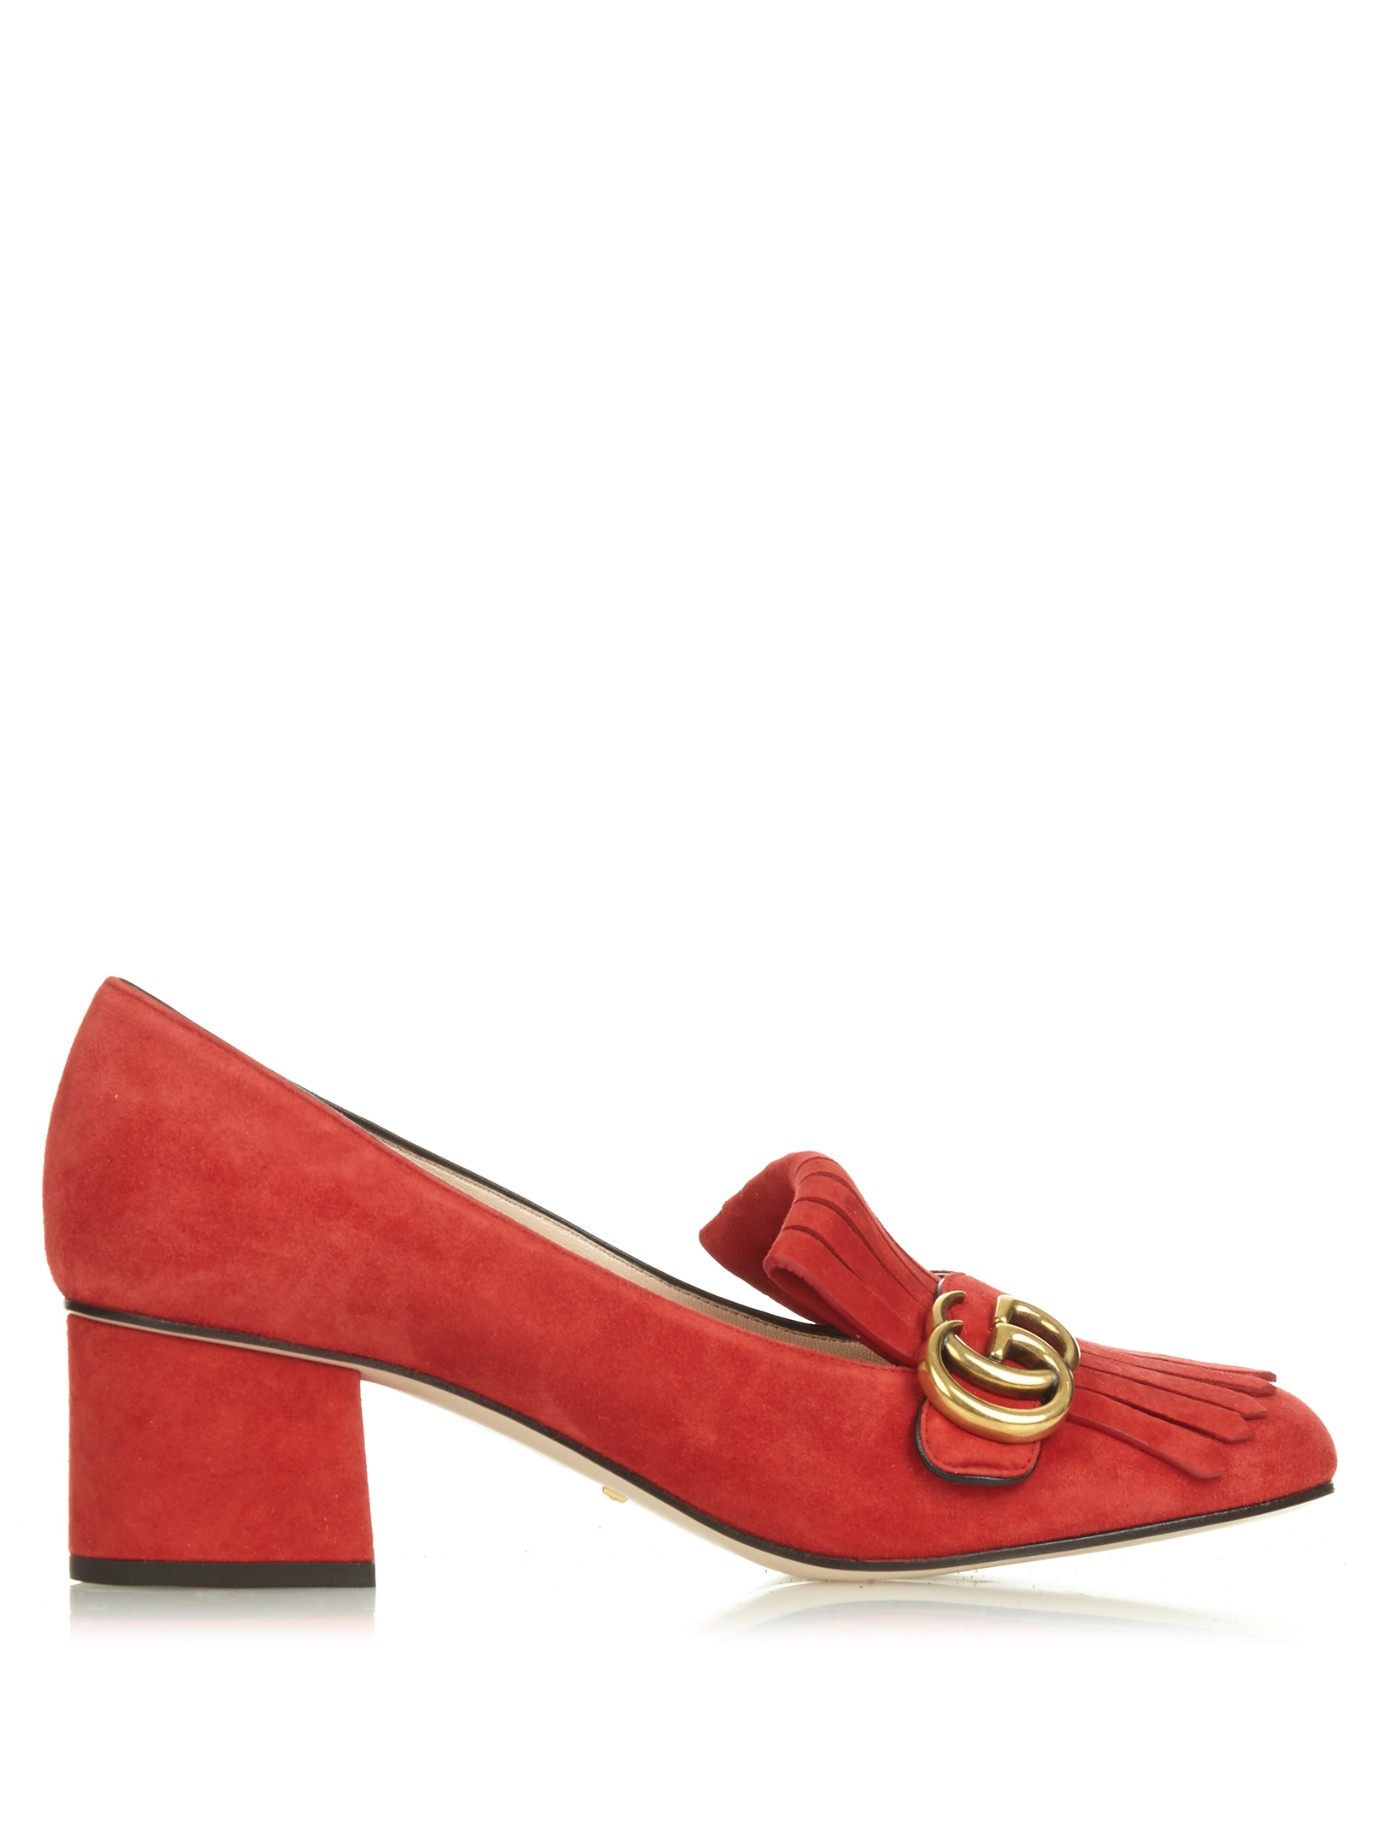 Gucci Marmont Fringed Suede Pumps in Red - Lyst